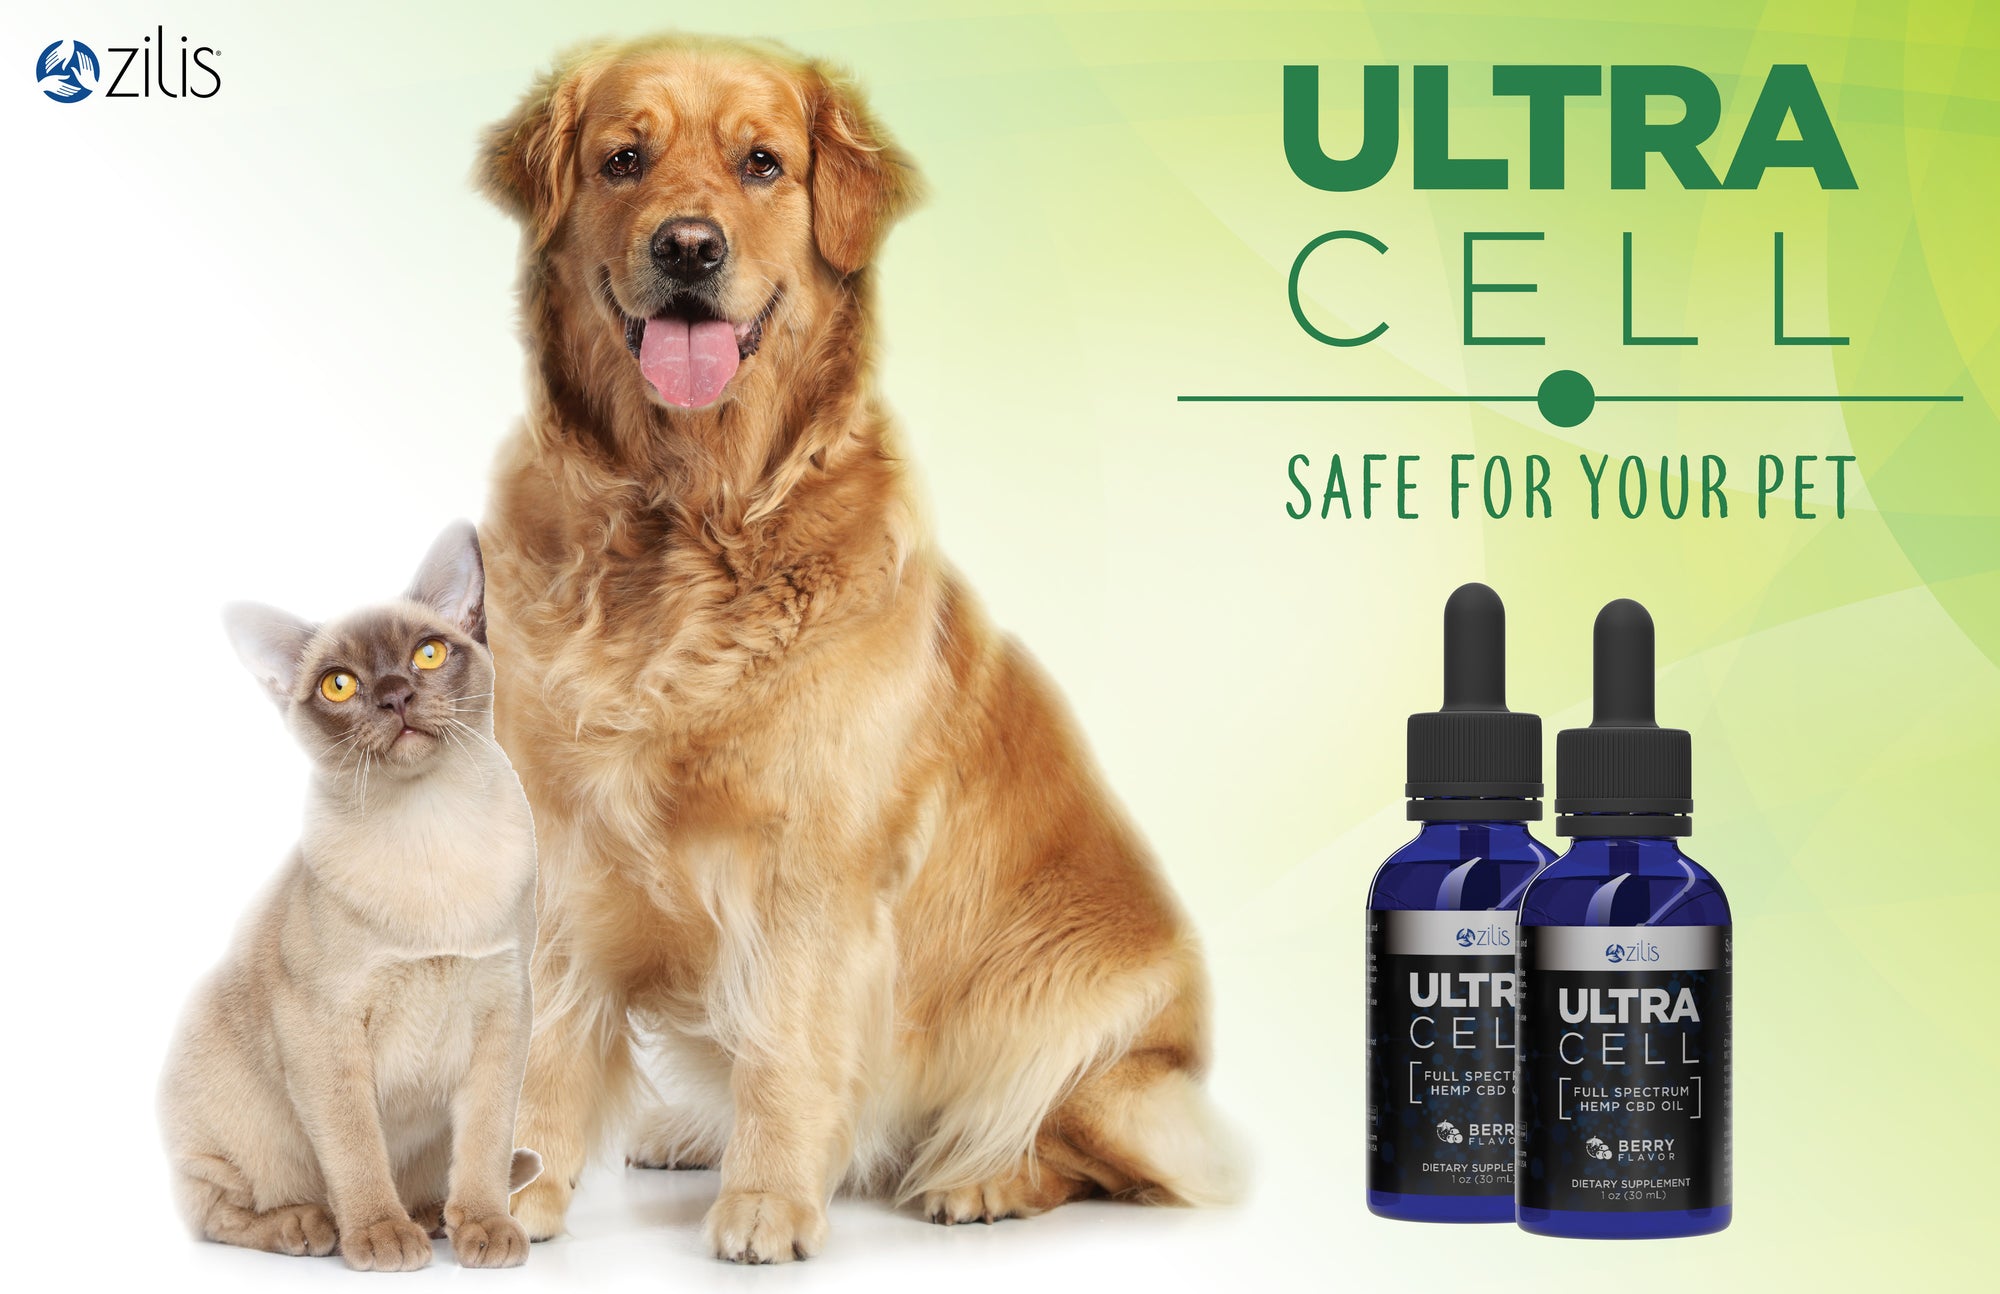 Can UltraCell CBD Oil benefit Dogs?